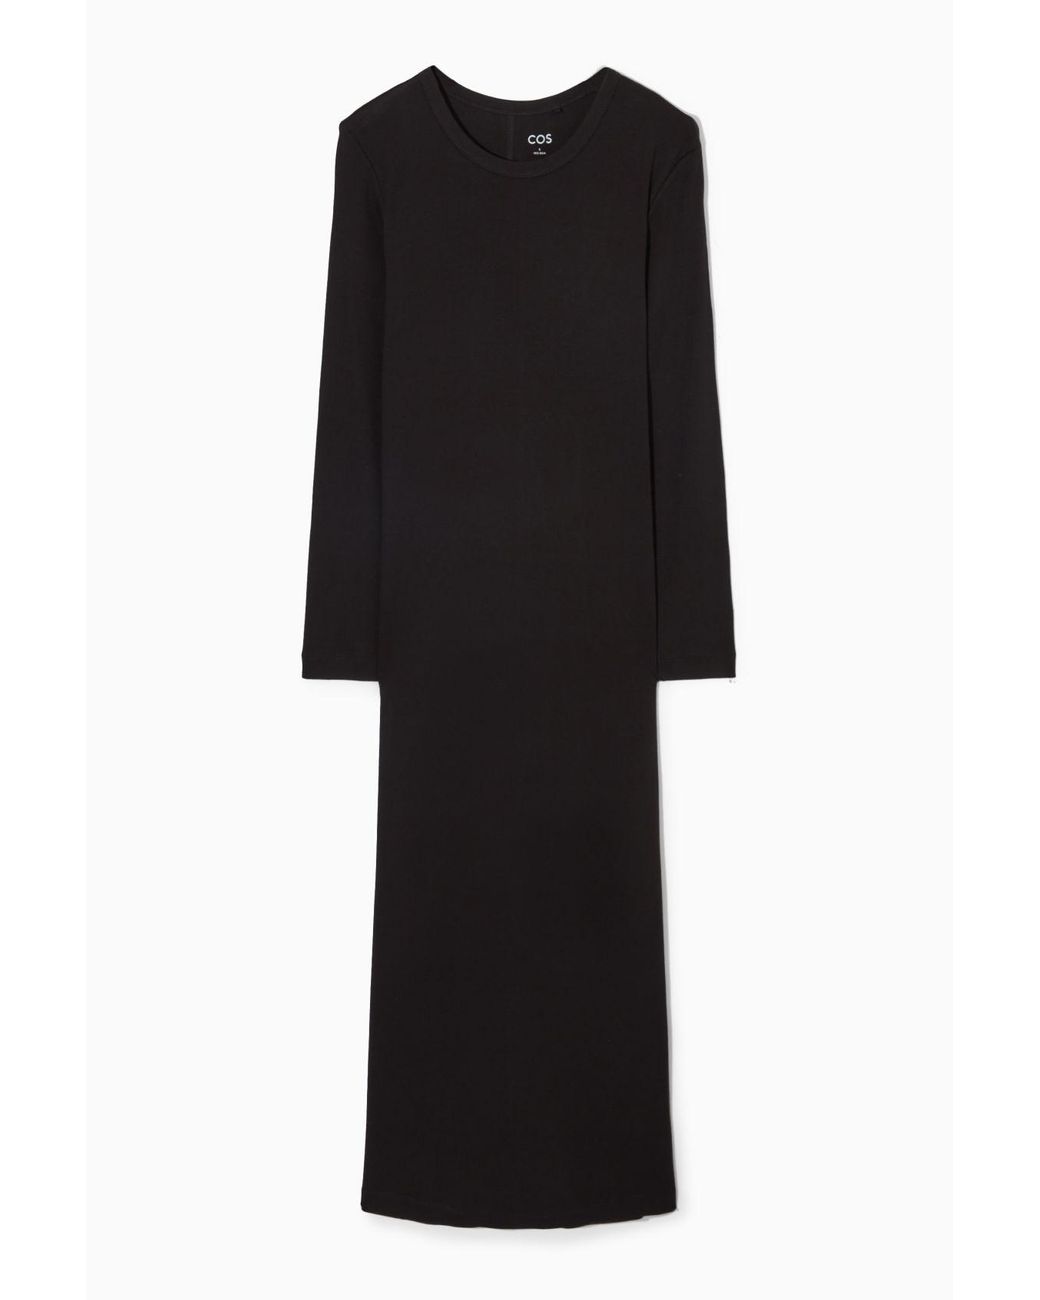 COS Ribbed Jersey Maxi Dress in Black | Lyst